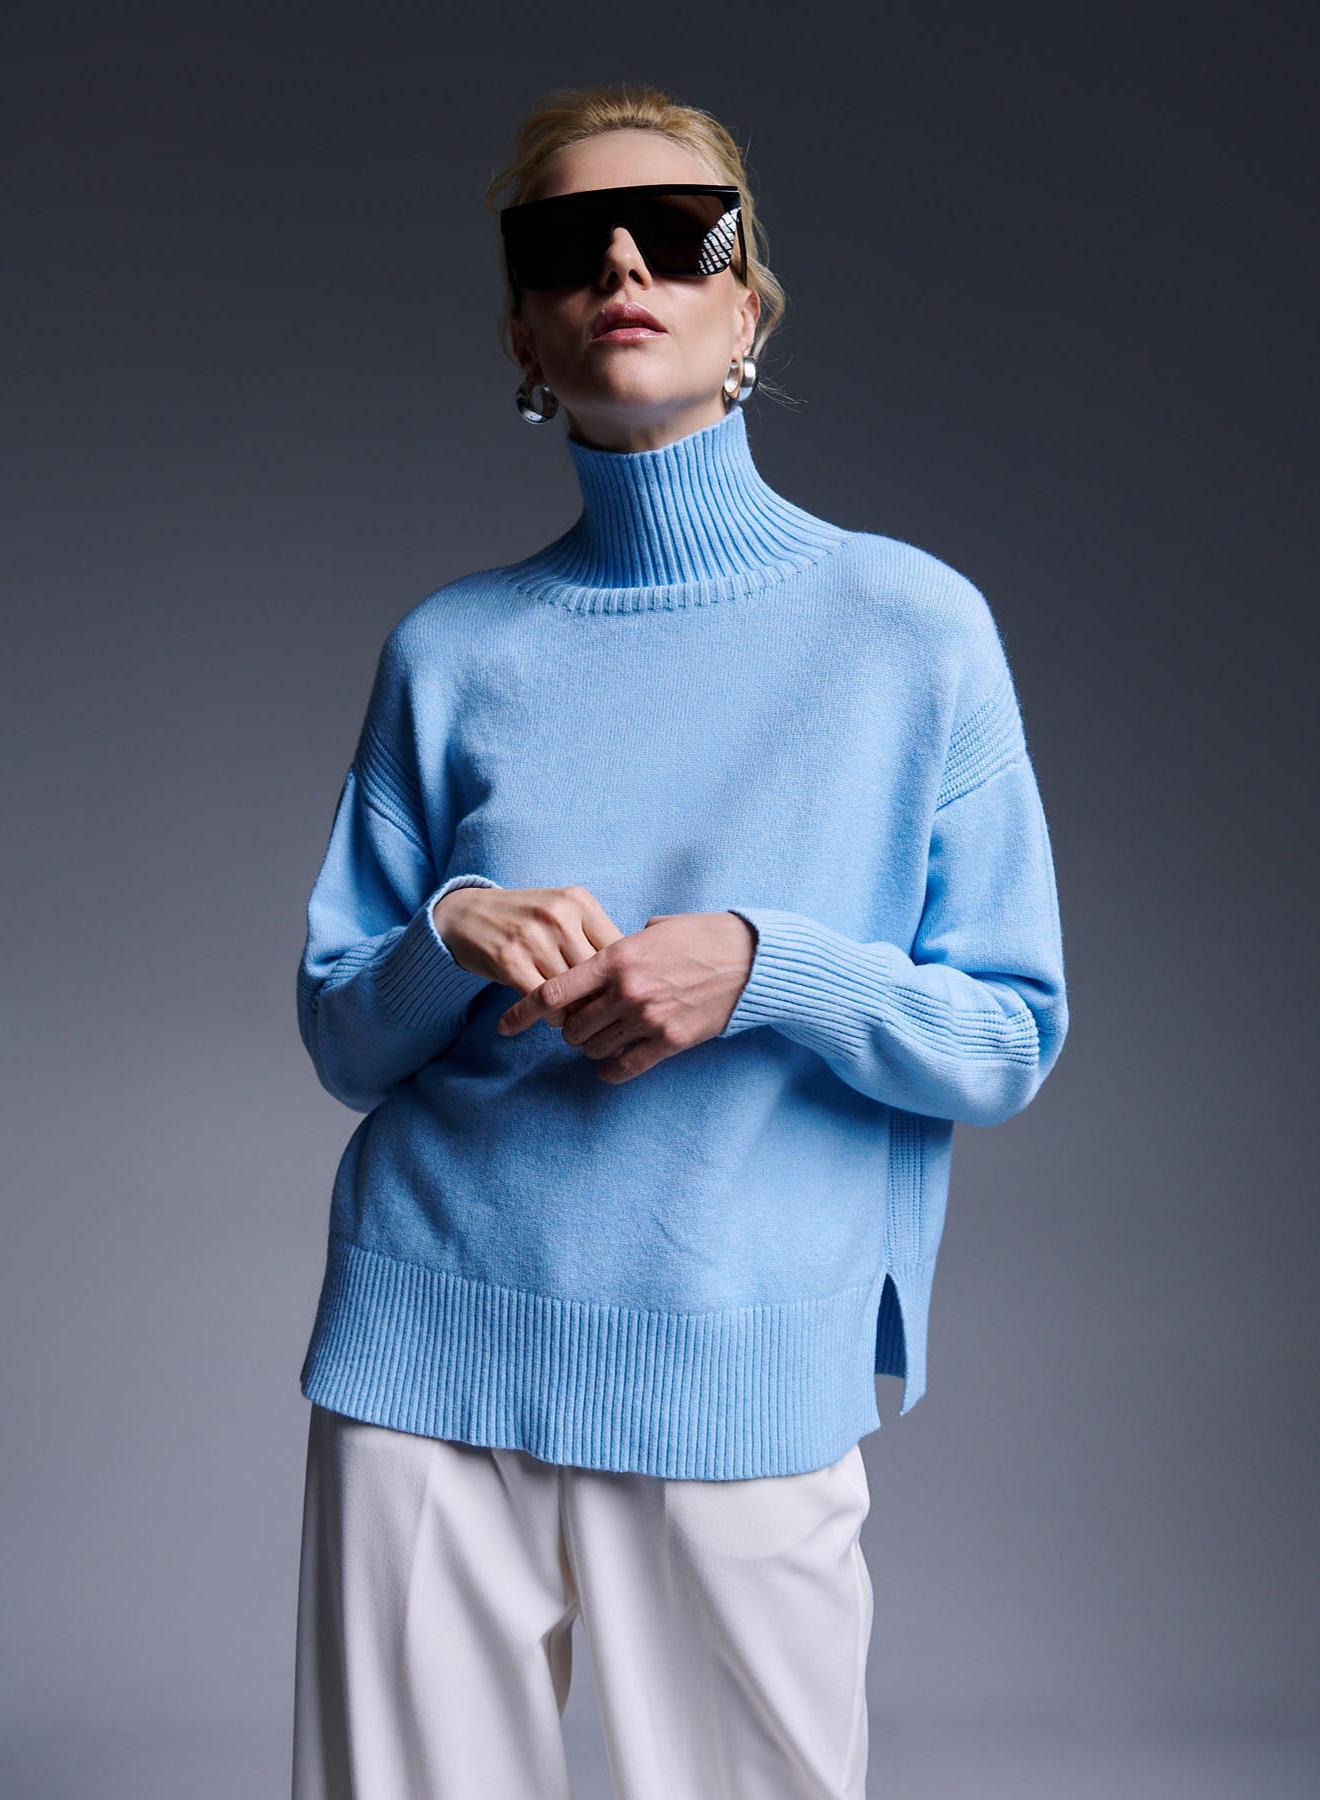 Turtleneck knitted blouse with side slits - 2